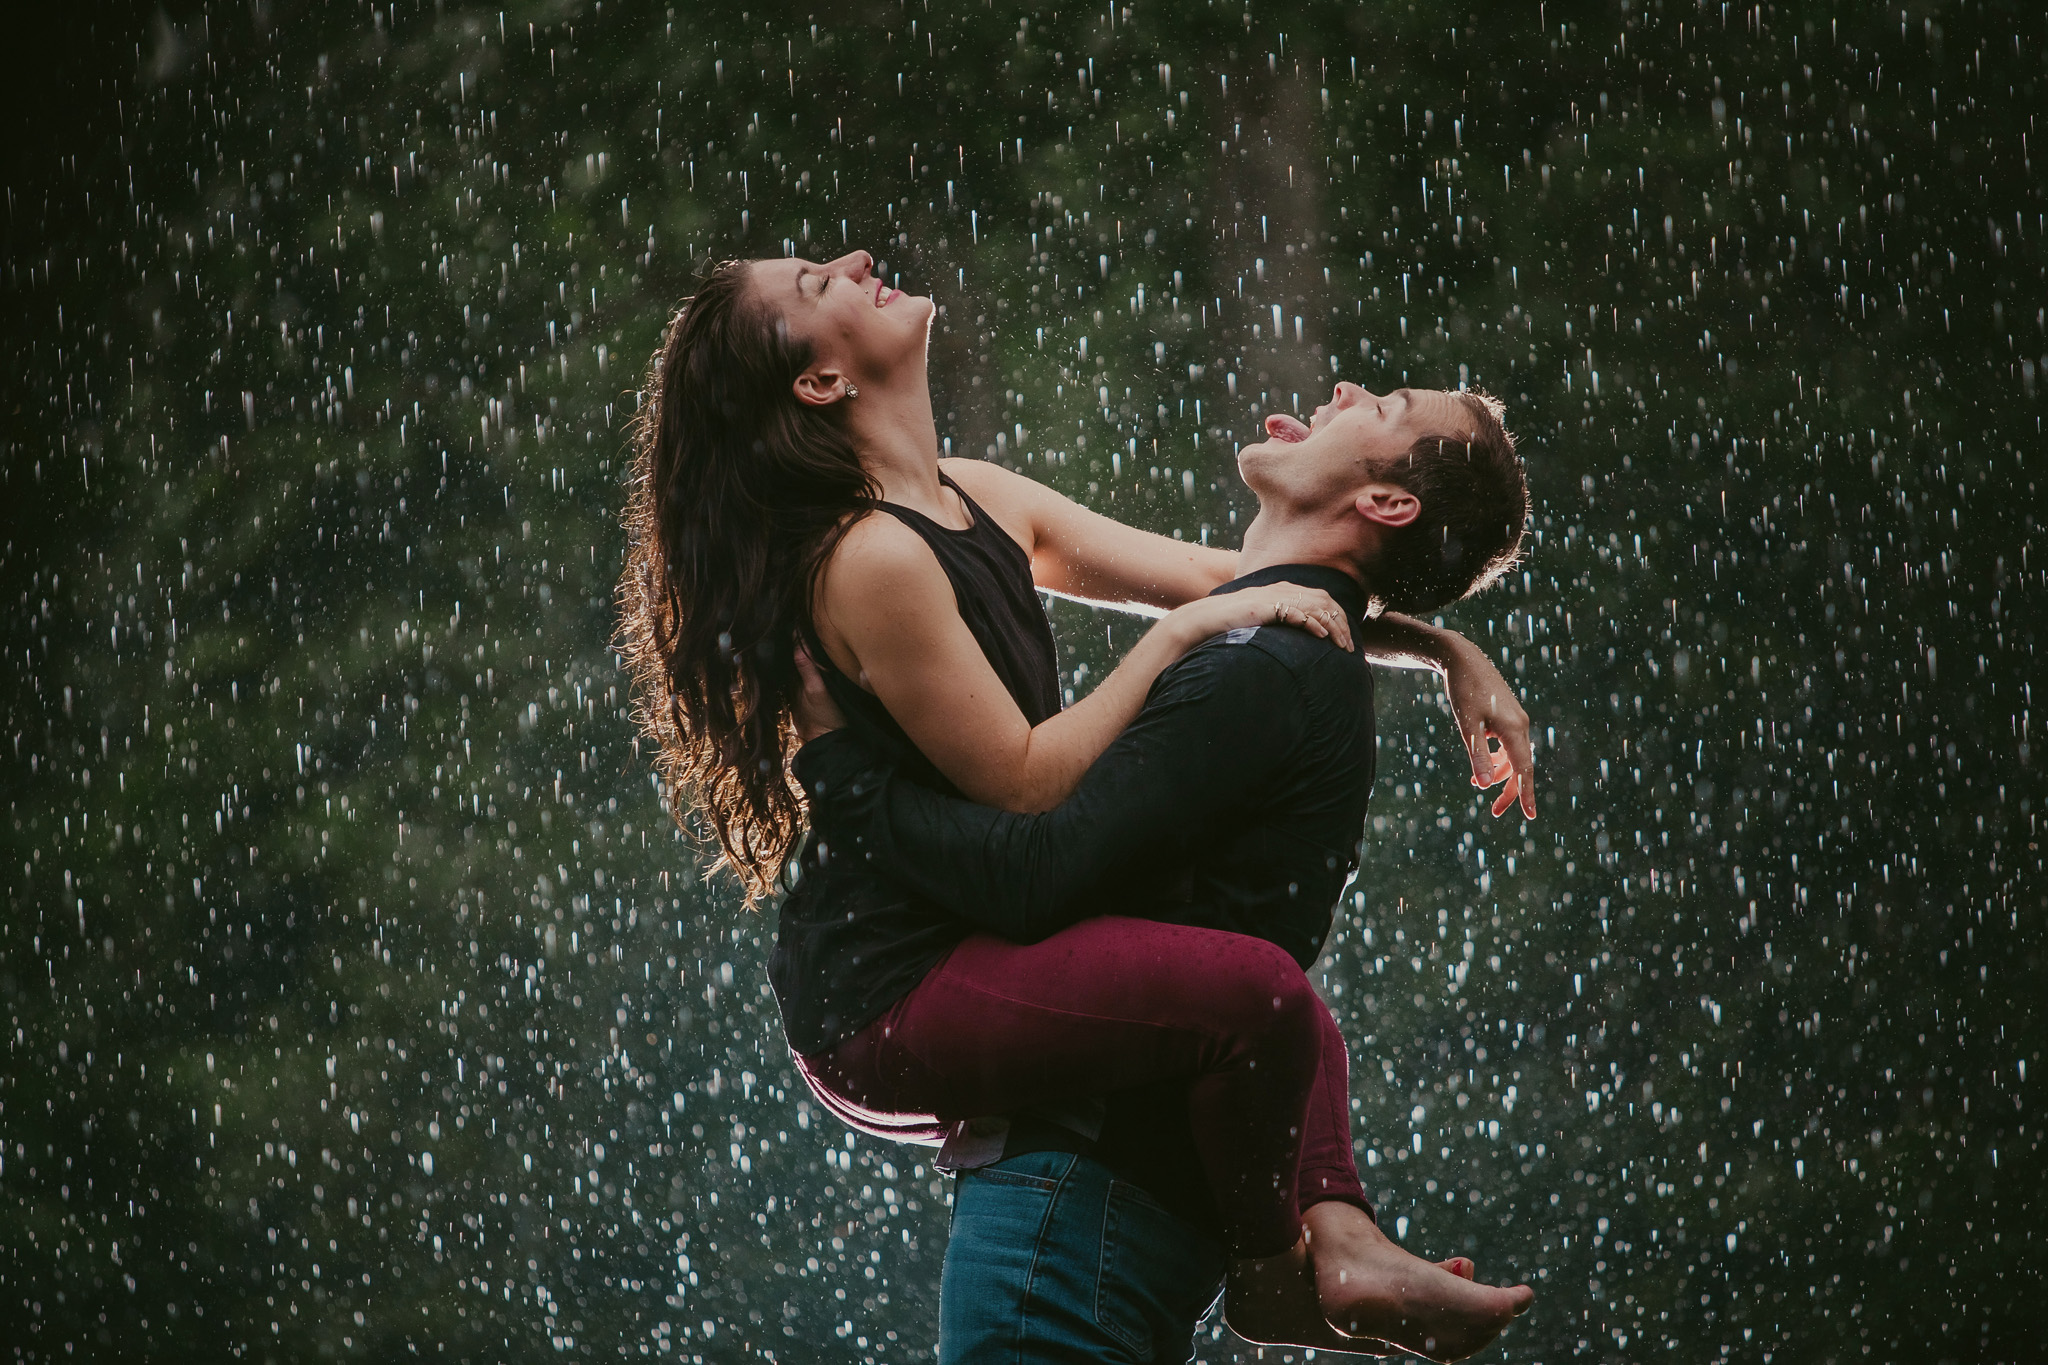 Couple laughs at the rain storm during their Charlotte, NC anniversary session